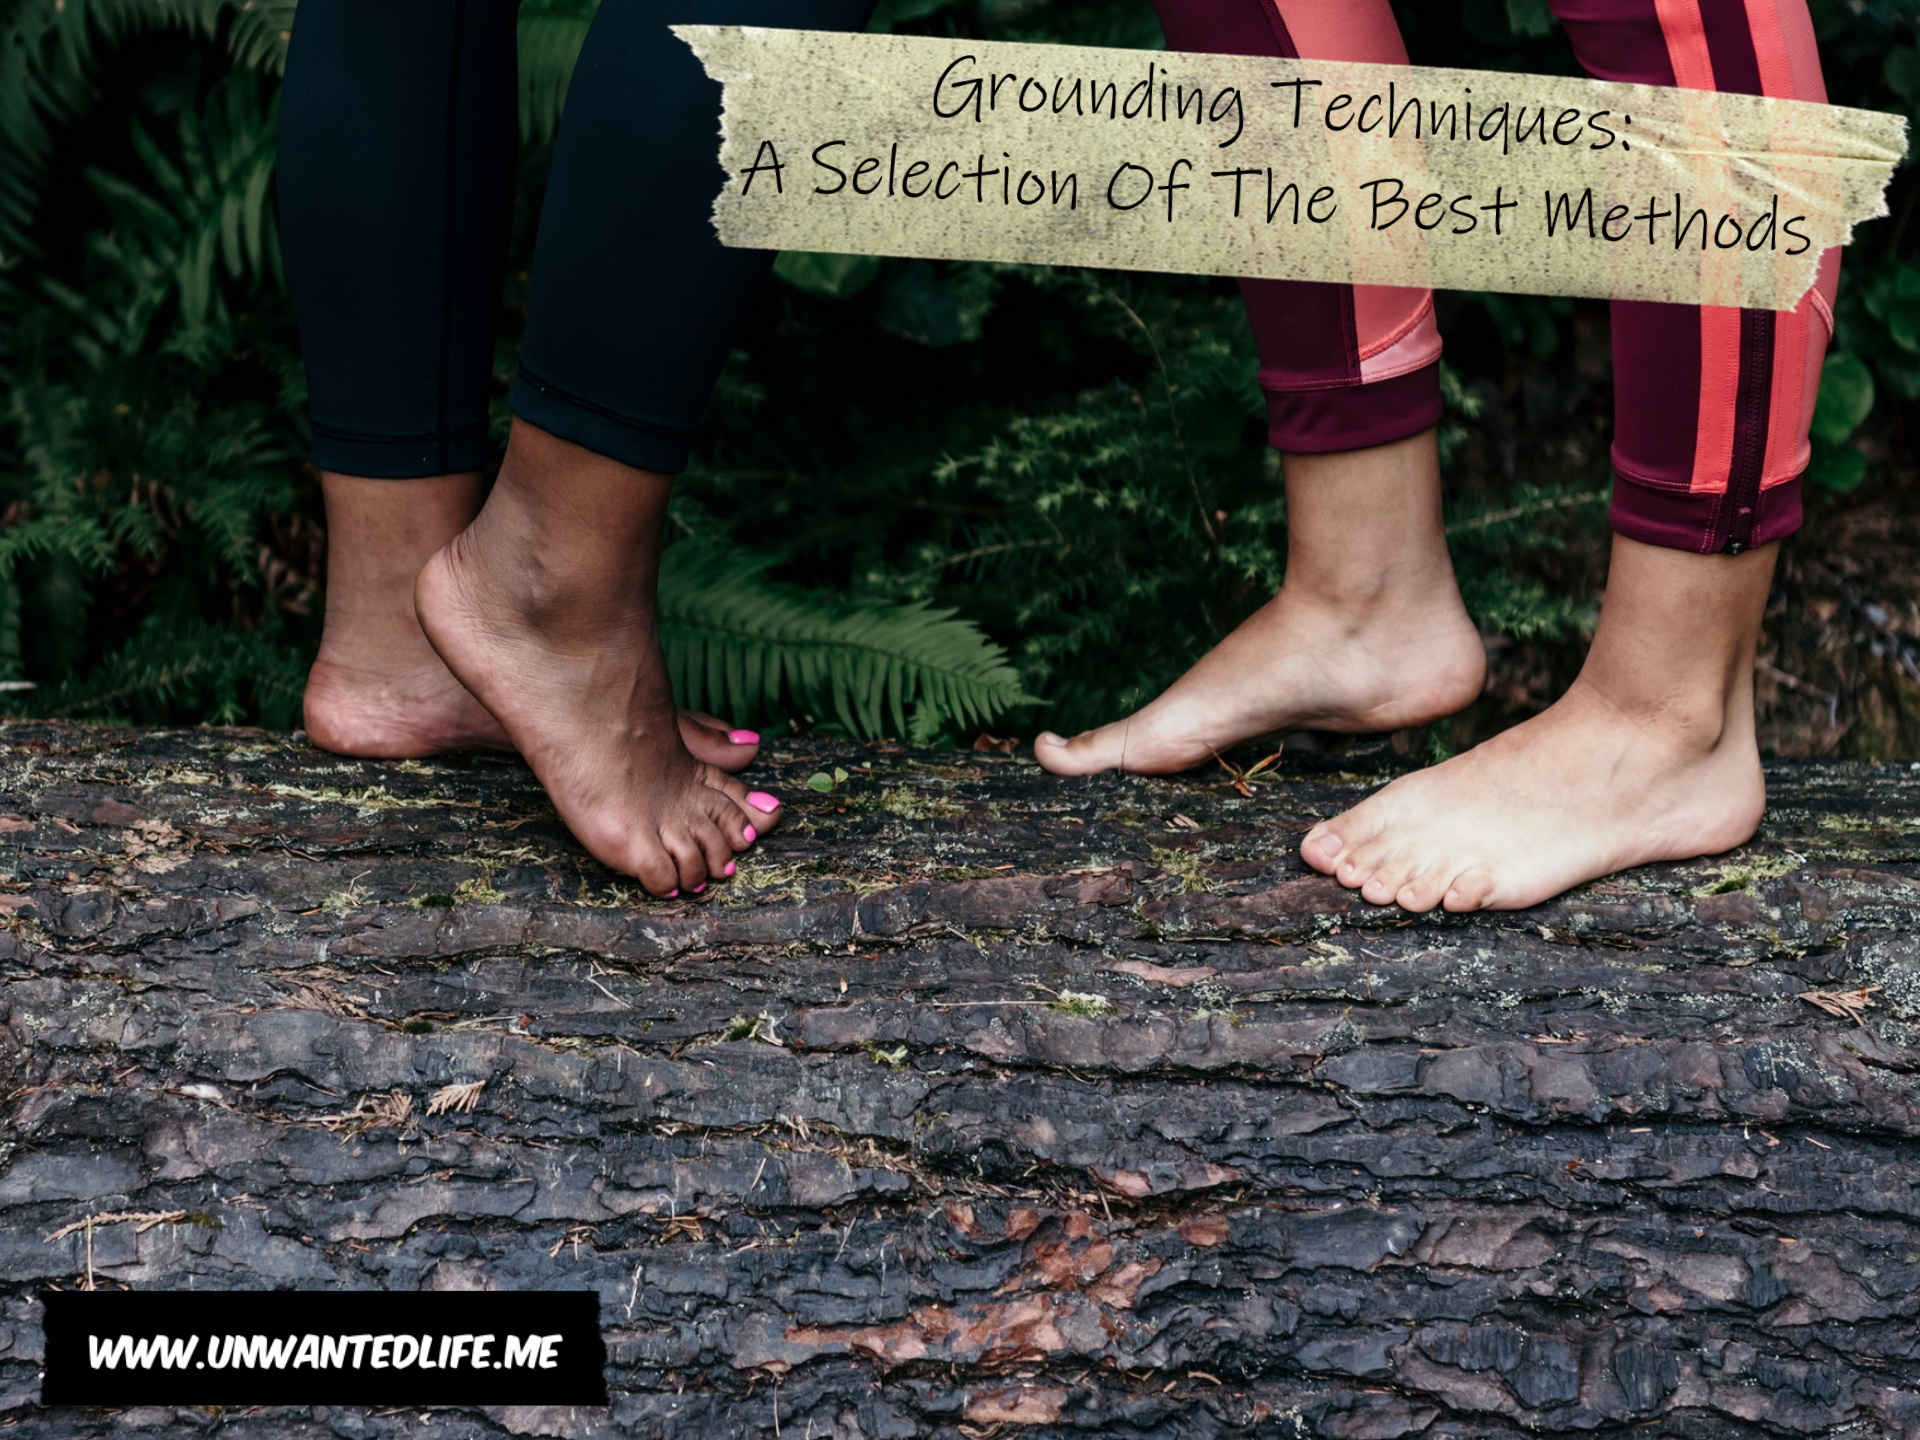 A photo of Black woman and A White woman standing bare foot on a fallen tree trunk to represent the topic of the article - Grounding Techniques: A Selection Of The Best Methods